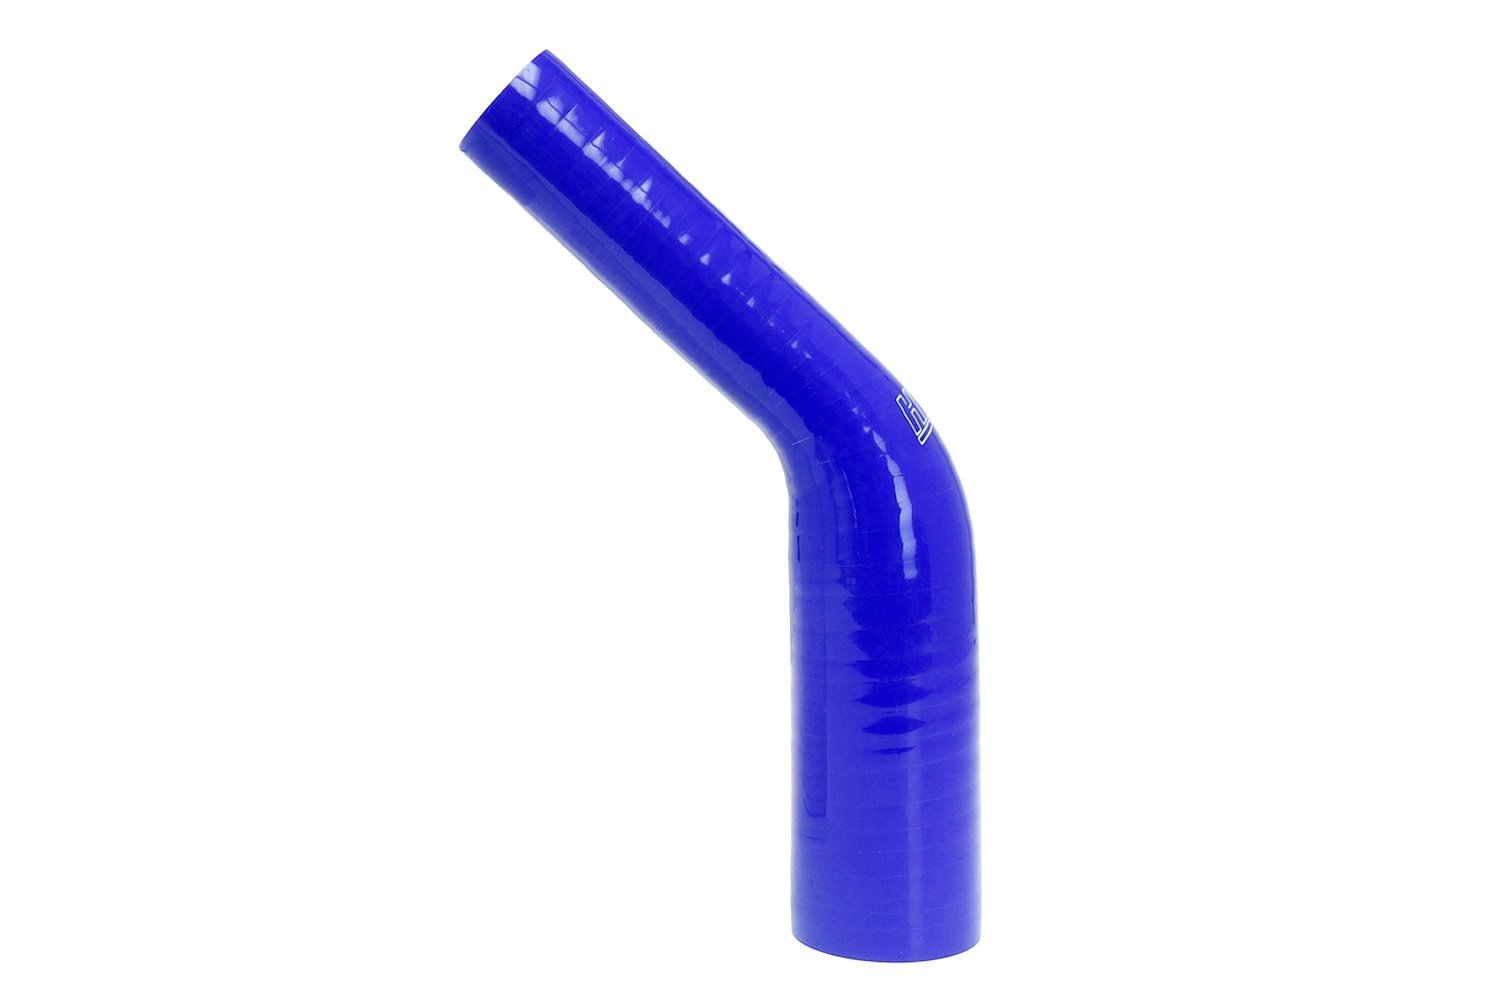 HTSER45-150-175-BLUE Silicone 45-Degree Elbow Hose, High-Temp 4-Ply Reinforced, 1-1/2 in. - 1-3/4 in. ID, Blue